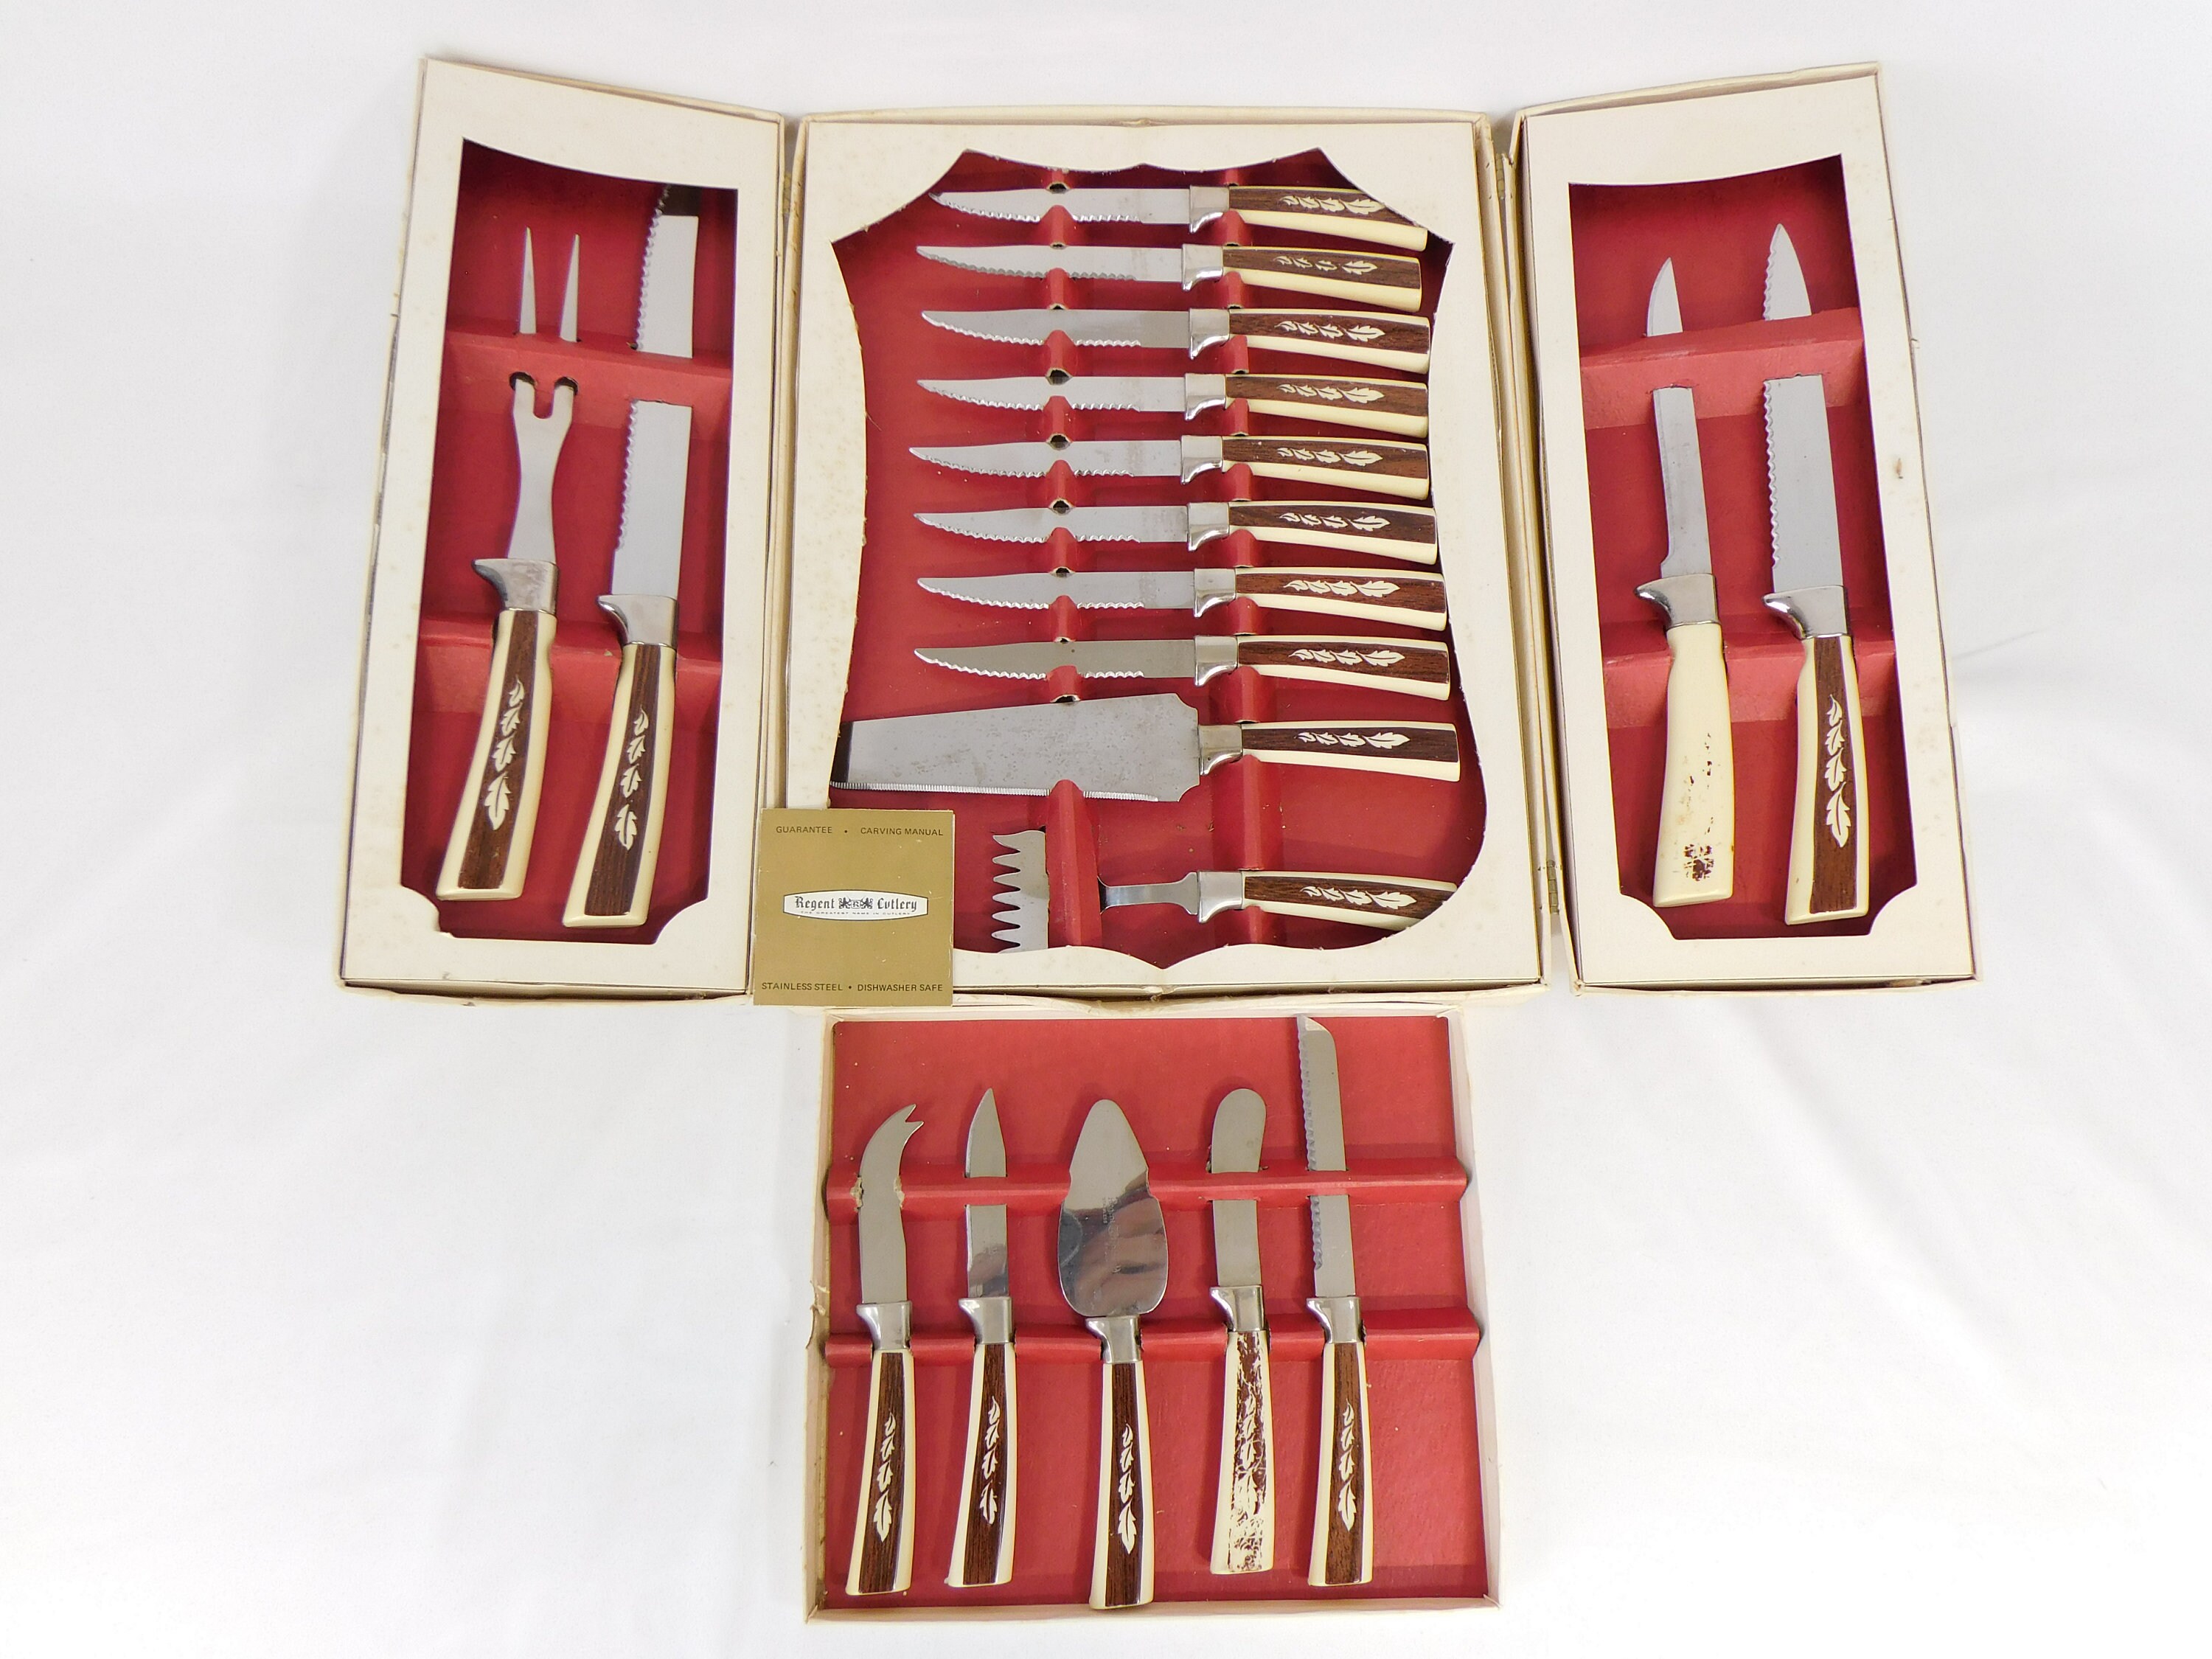 Kitchen Knife 19 Piece Cutlery Set Emperor Nineteen Made in USA 